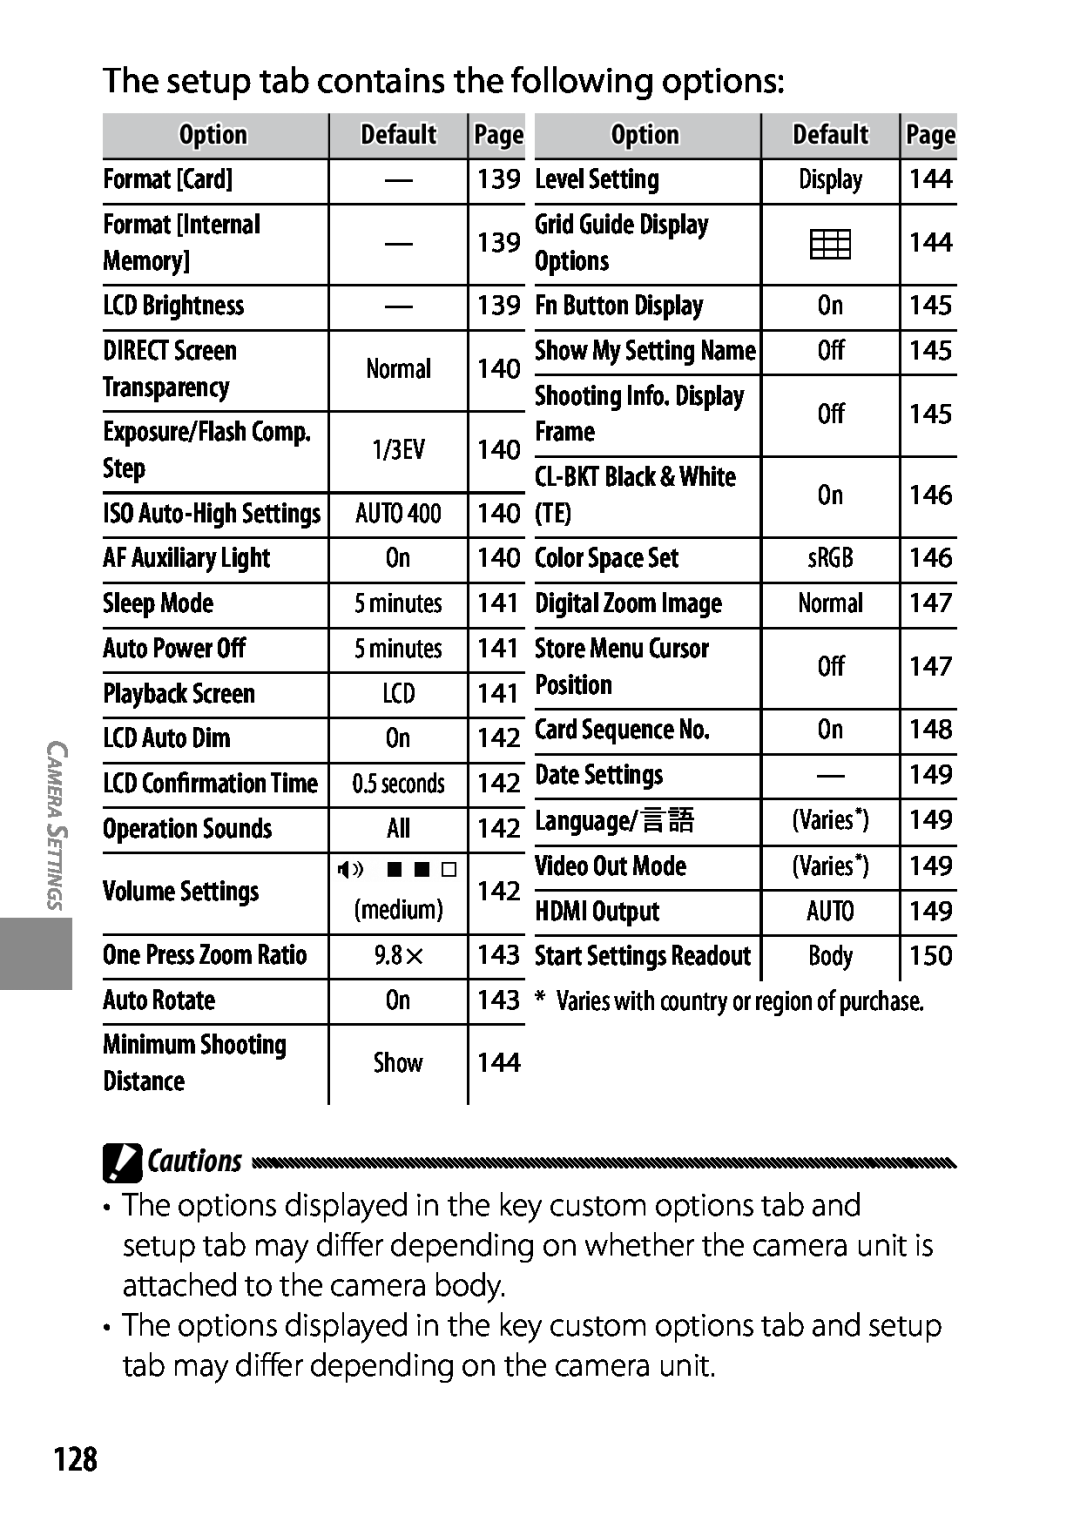 Ricoh 170553, GXR The setup tab contains the following options, Cautions, Format Internal, LCD Brightness, Color Space Set 